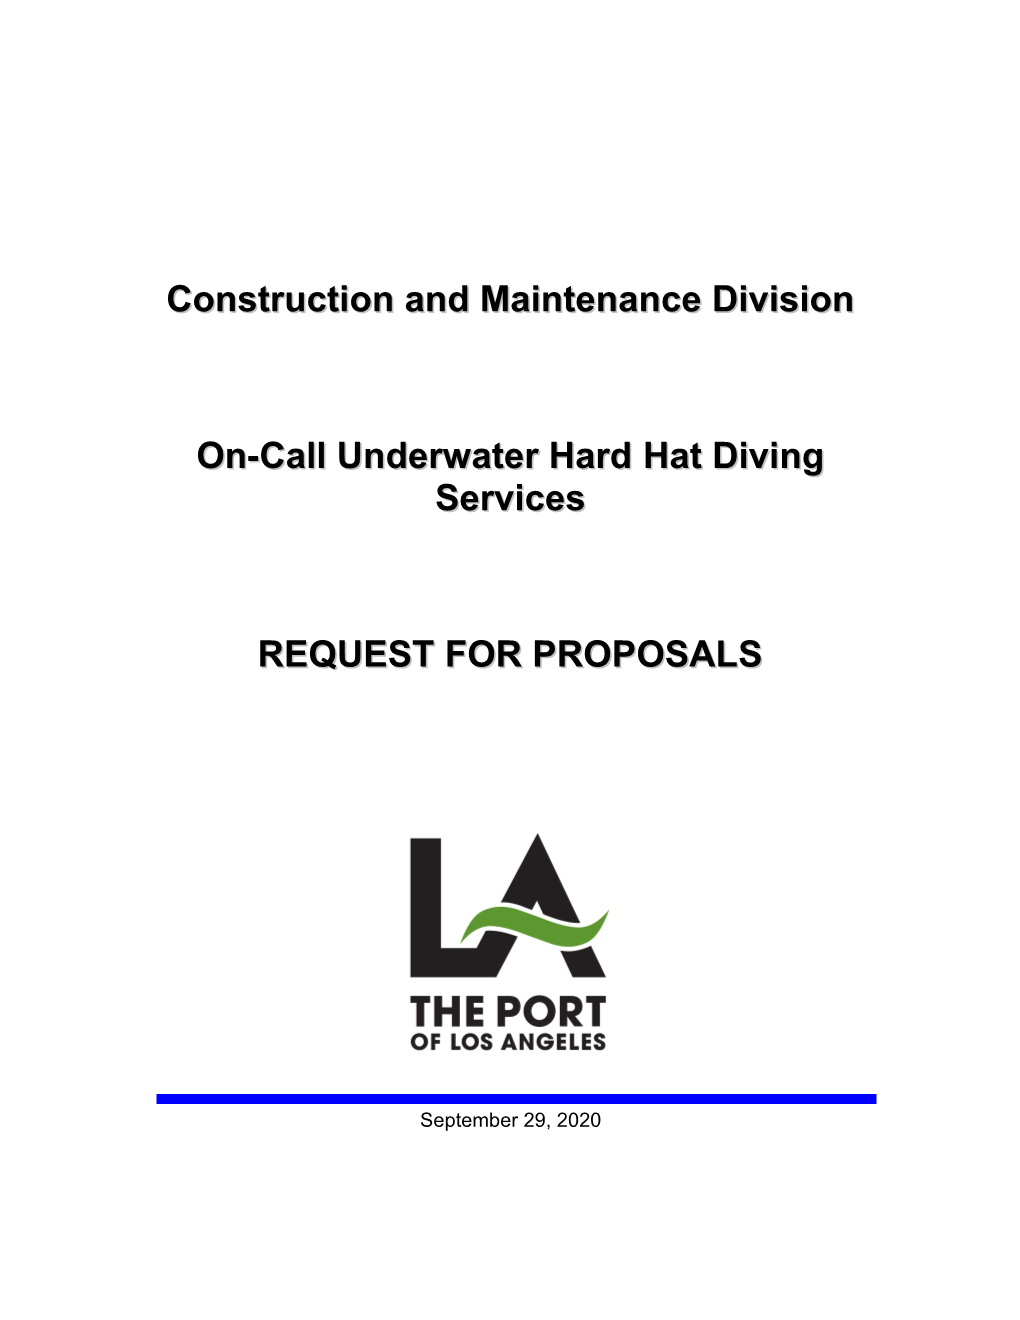 Construction and Maintenance Division On-Call Underwater Hard